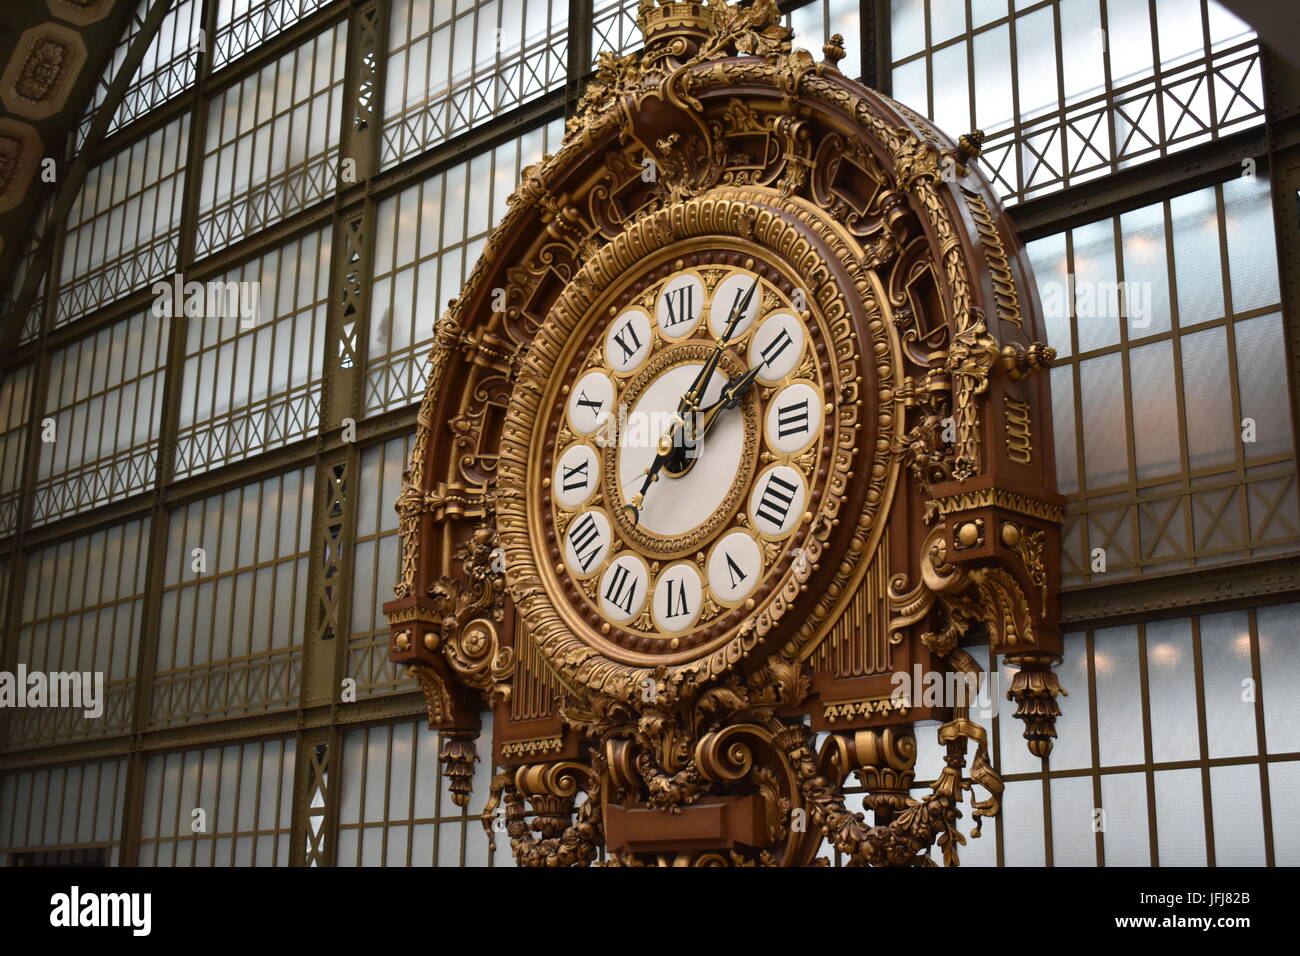 Old train station clock in the Musee de Orsay in Paris, France Stock Photo  - Alamy